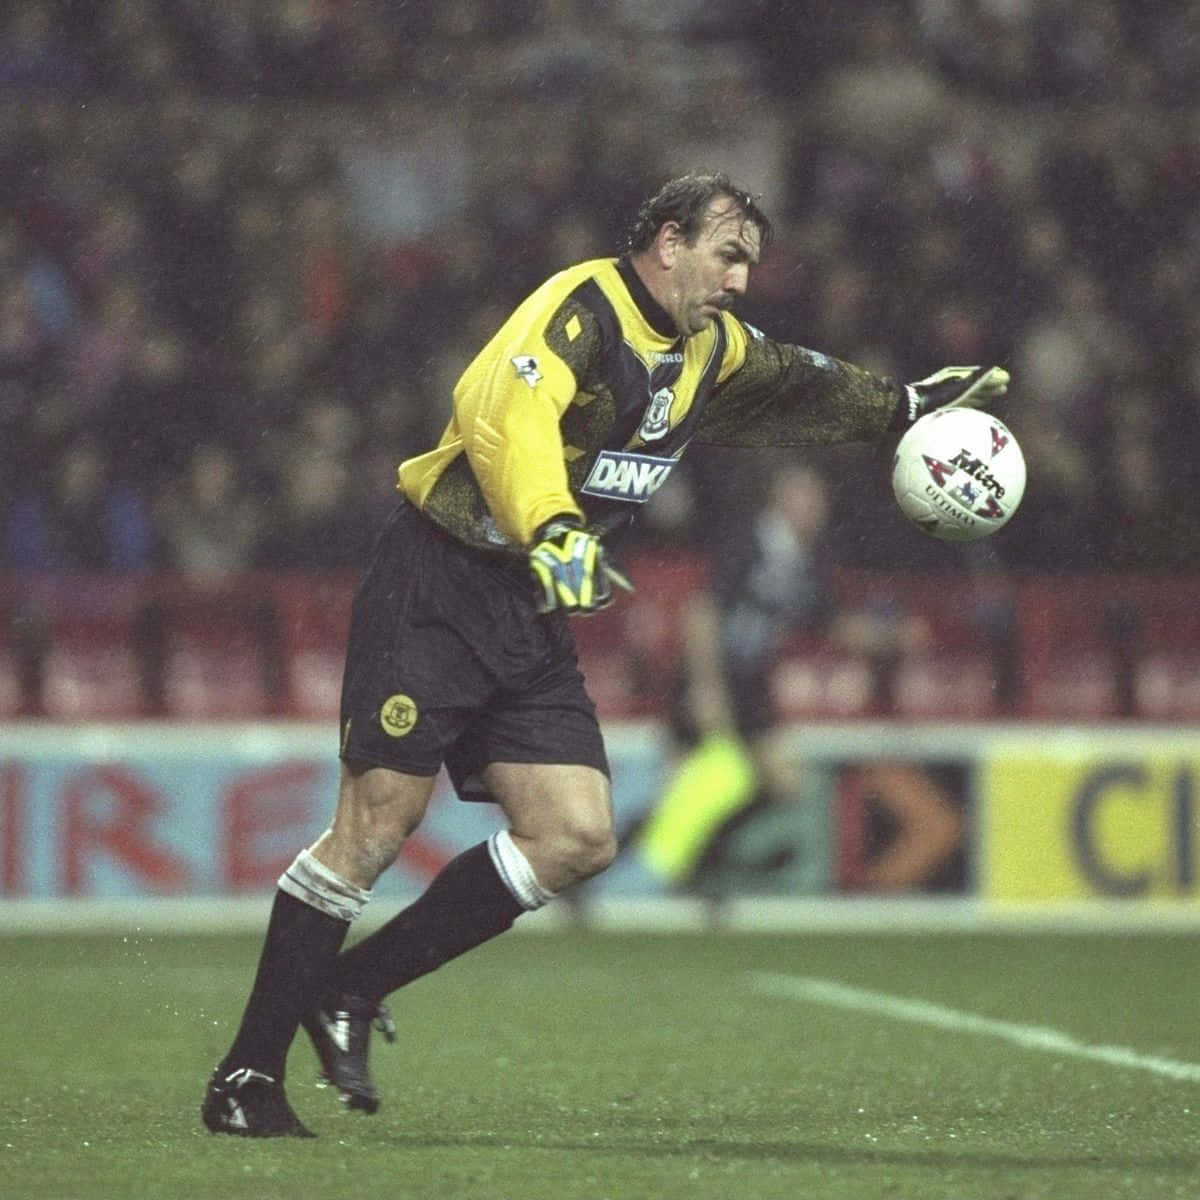 "Legendary Goalkeeper Neville Southall in action during an FA Carling Premier League match" Wallpaper